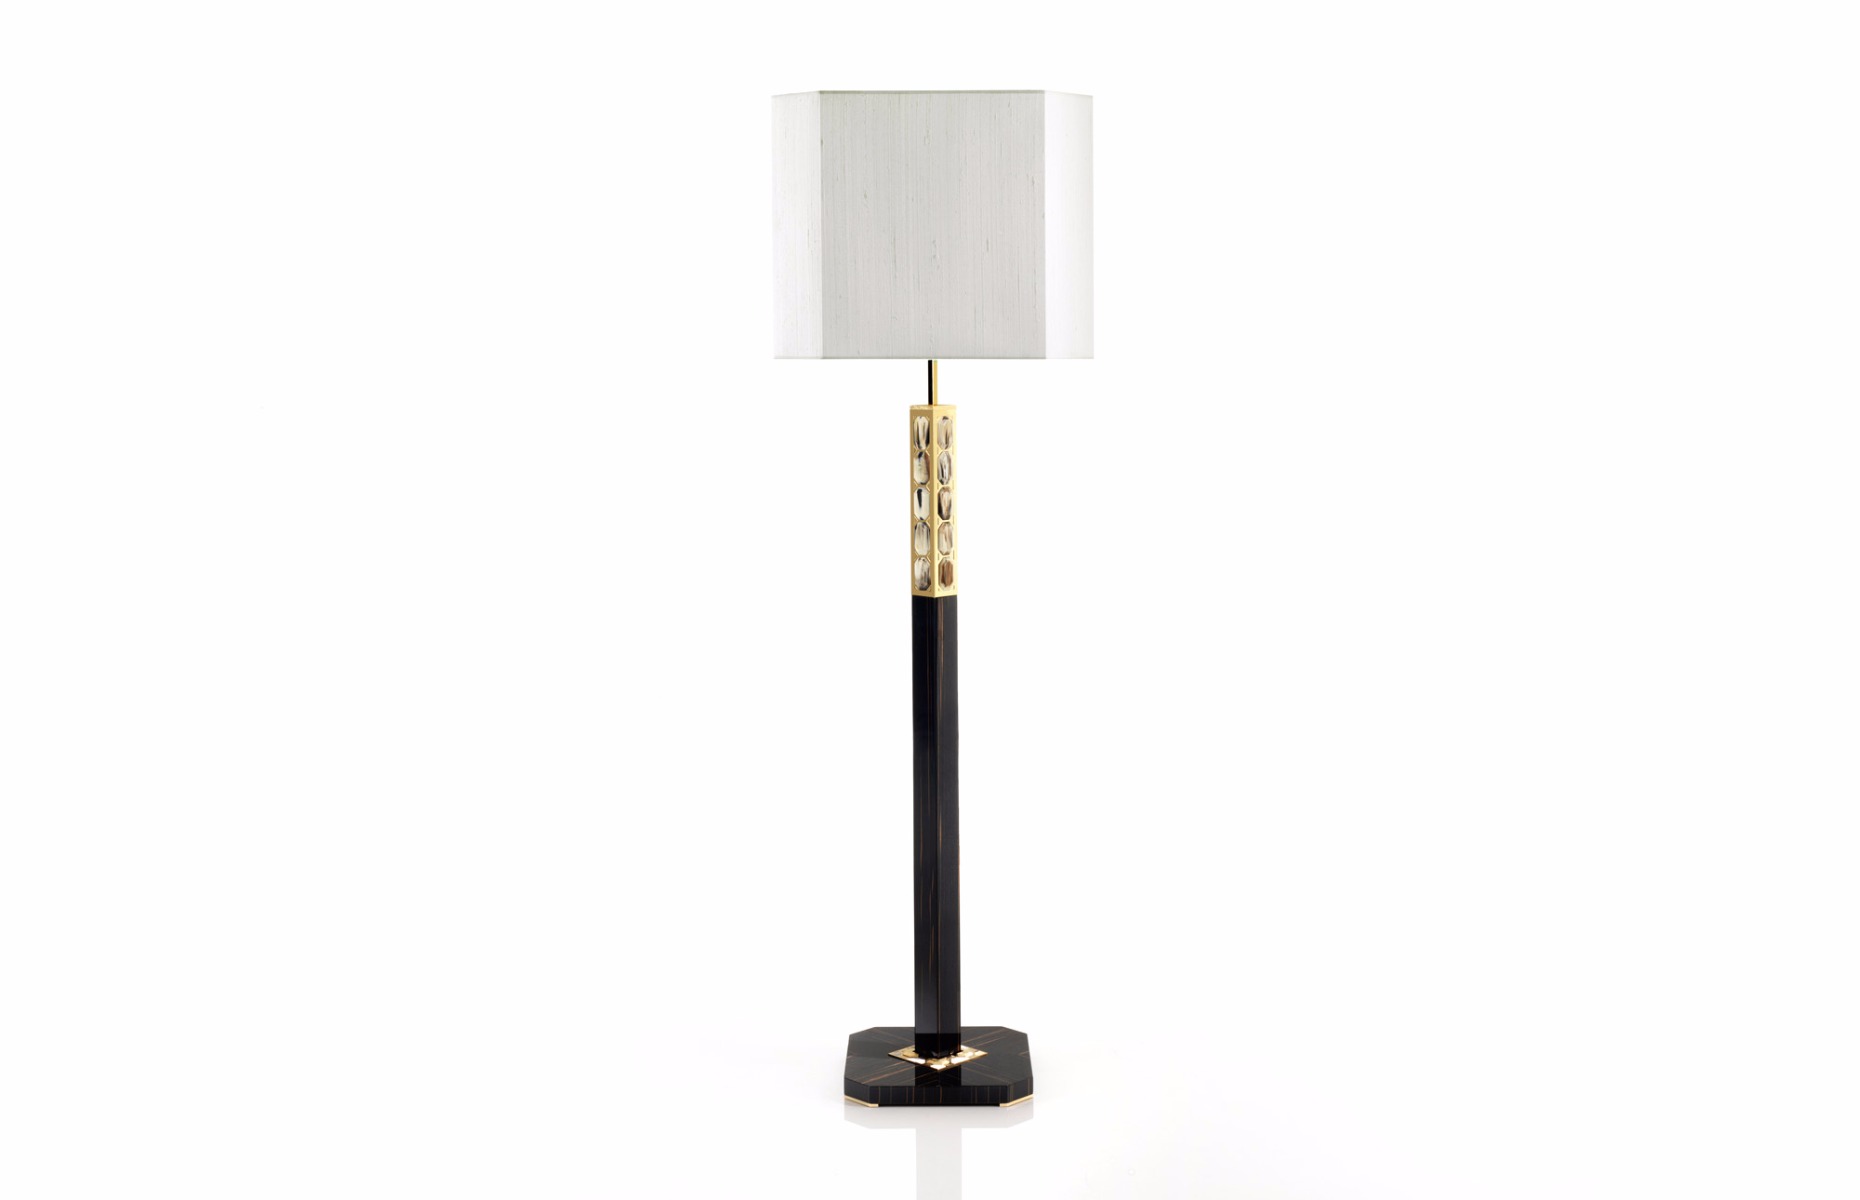 Luxury furniture Lamp with gold detailing at Luxuria London